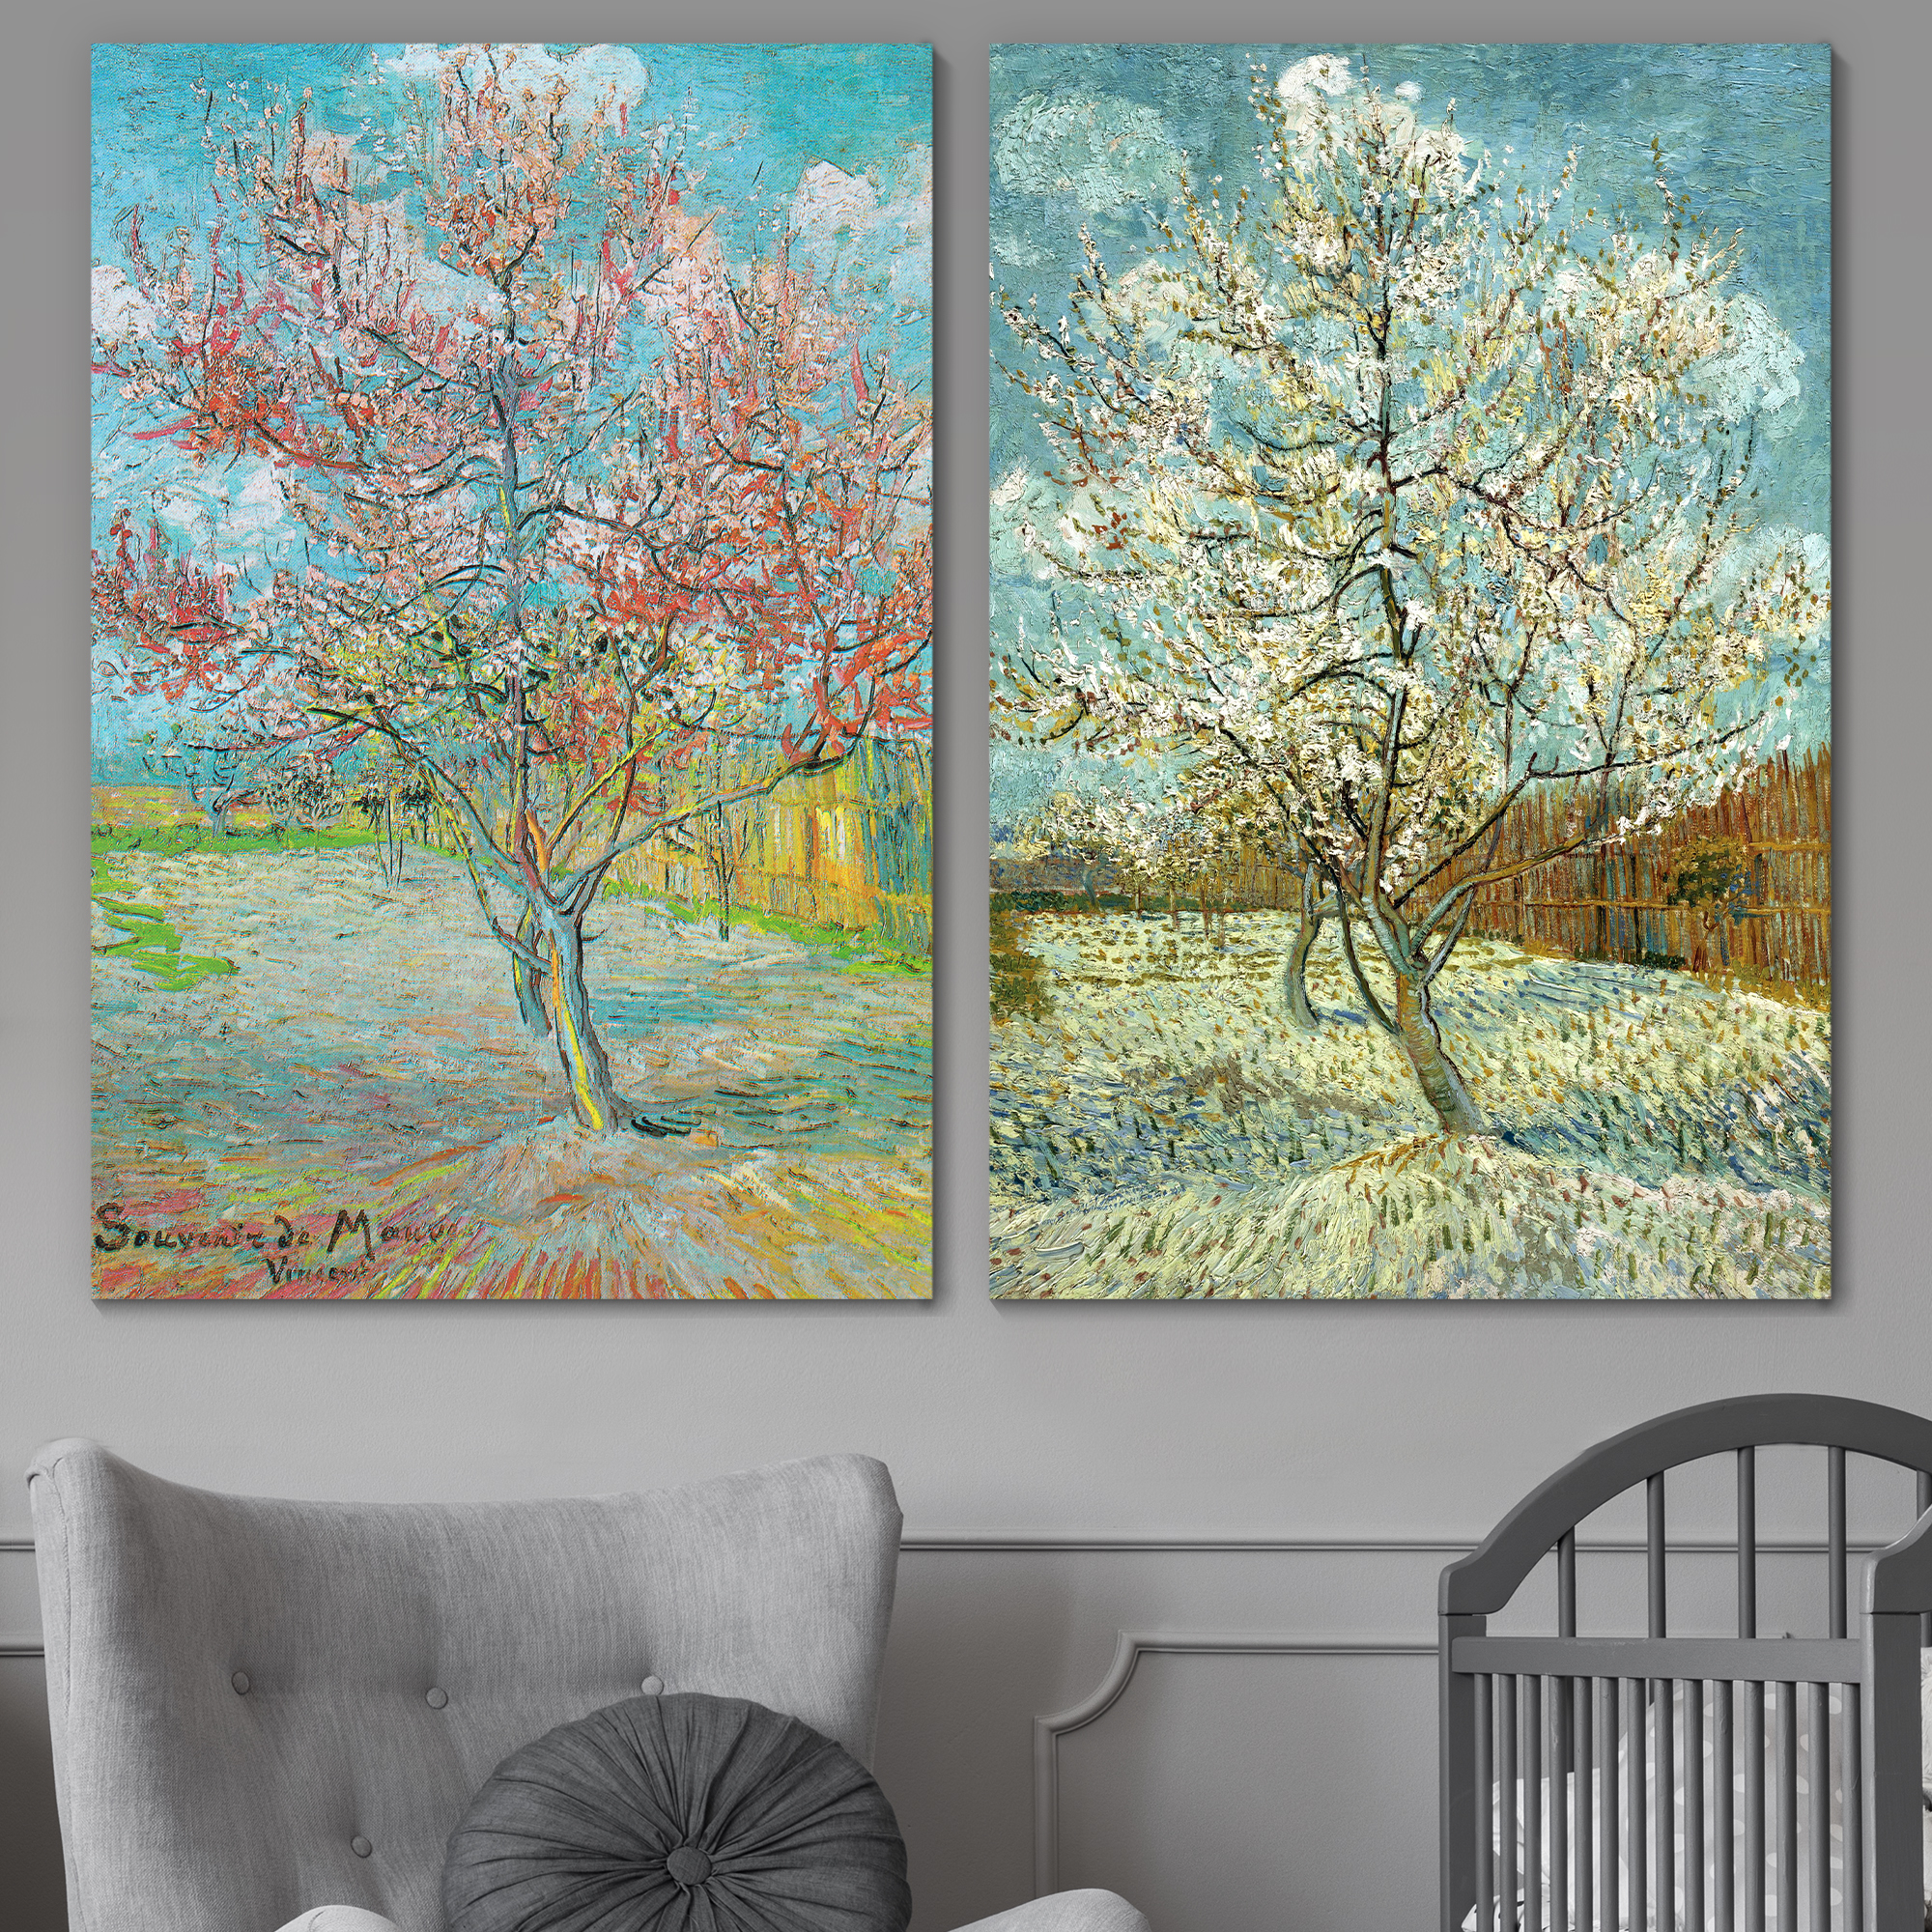 Wall26 - Peach Tree in Bloom by Vincent Van Gogh - Oil Painting Reproduction in Set of 2 | Canvas Prints Wall Art, Ready to Hang - 16